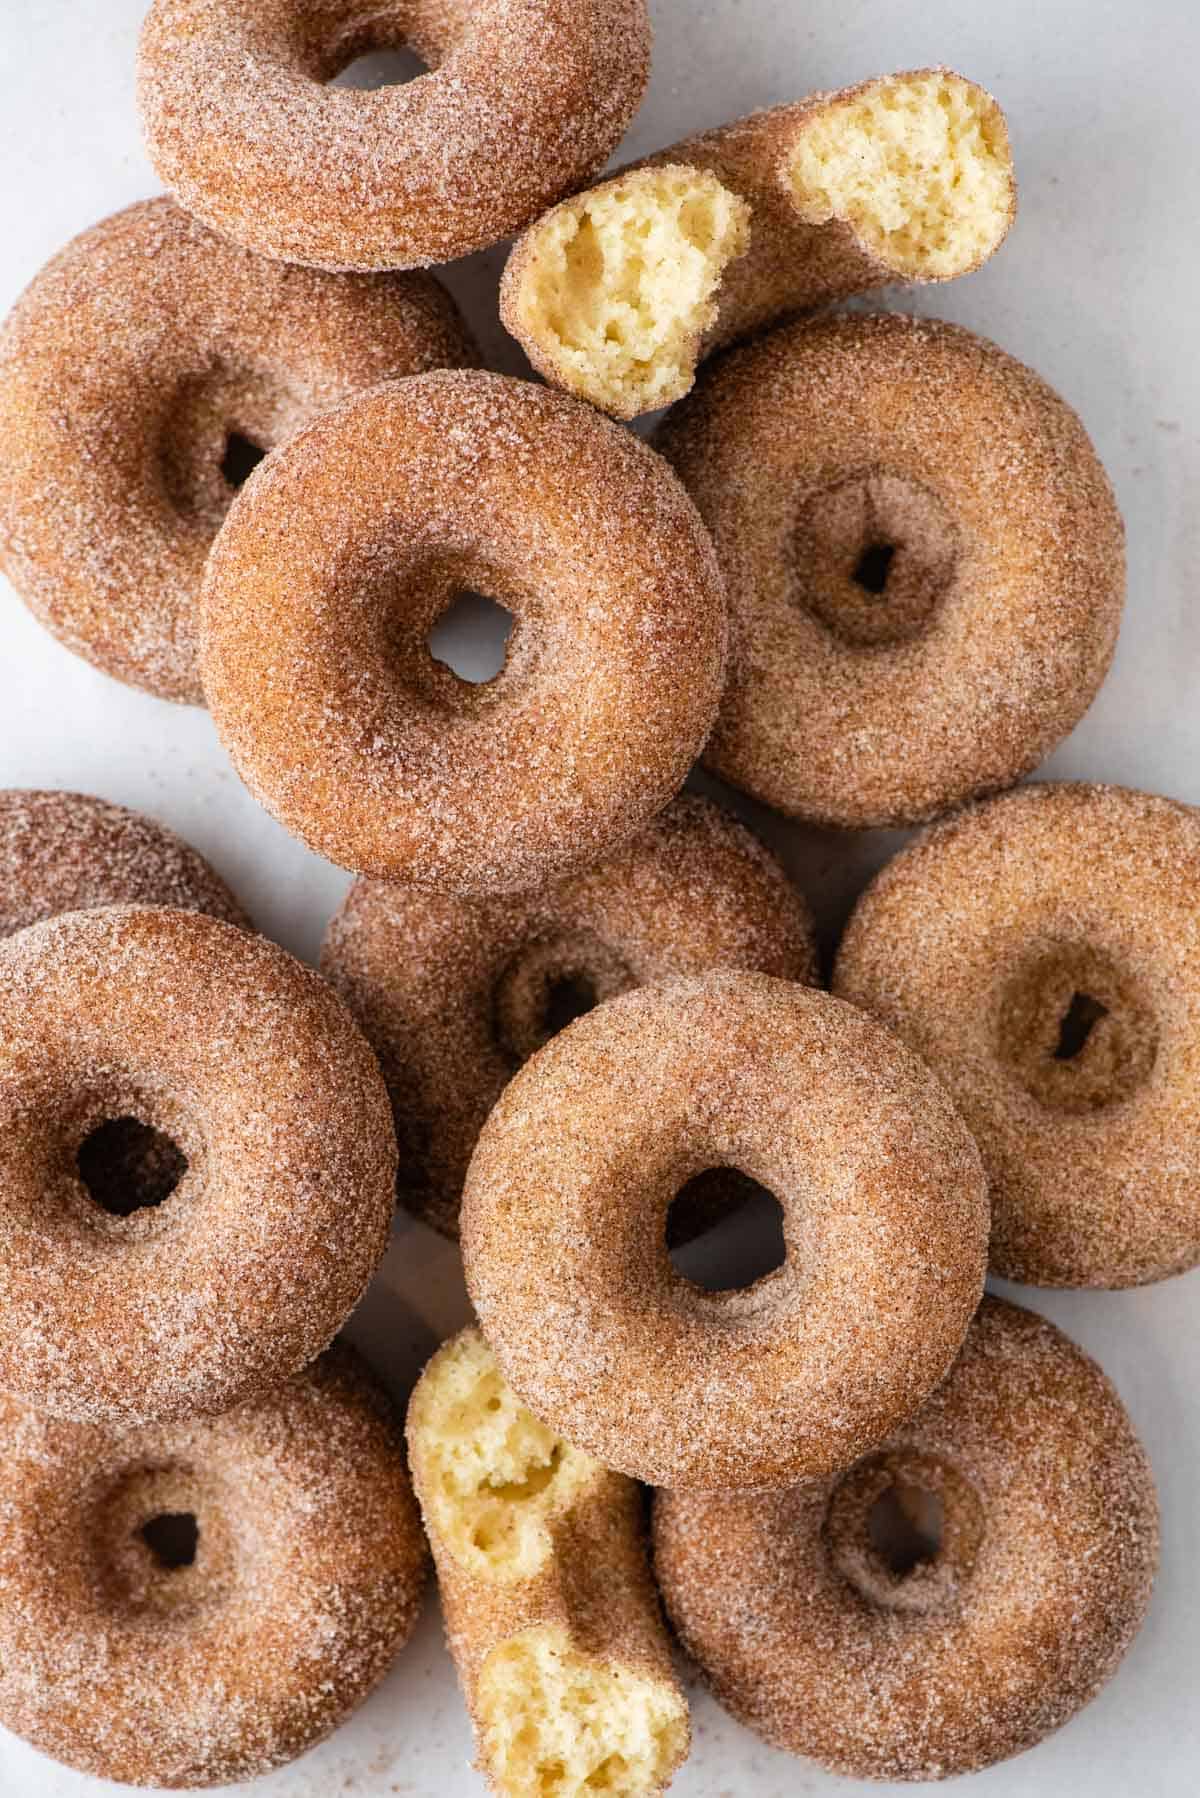 Cinnamon Sugar Donuts arranged in a pile on white background 